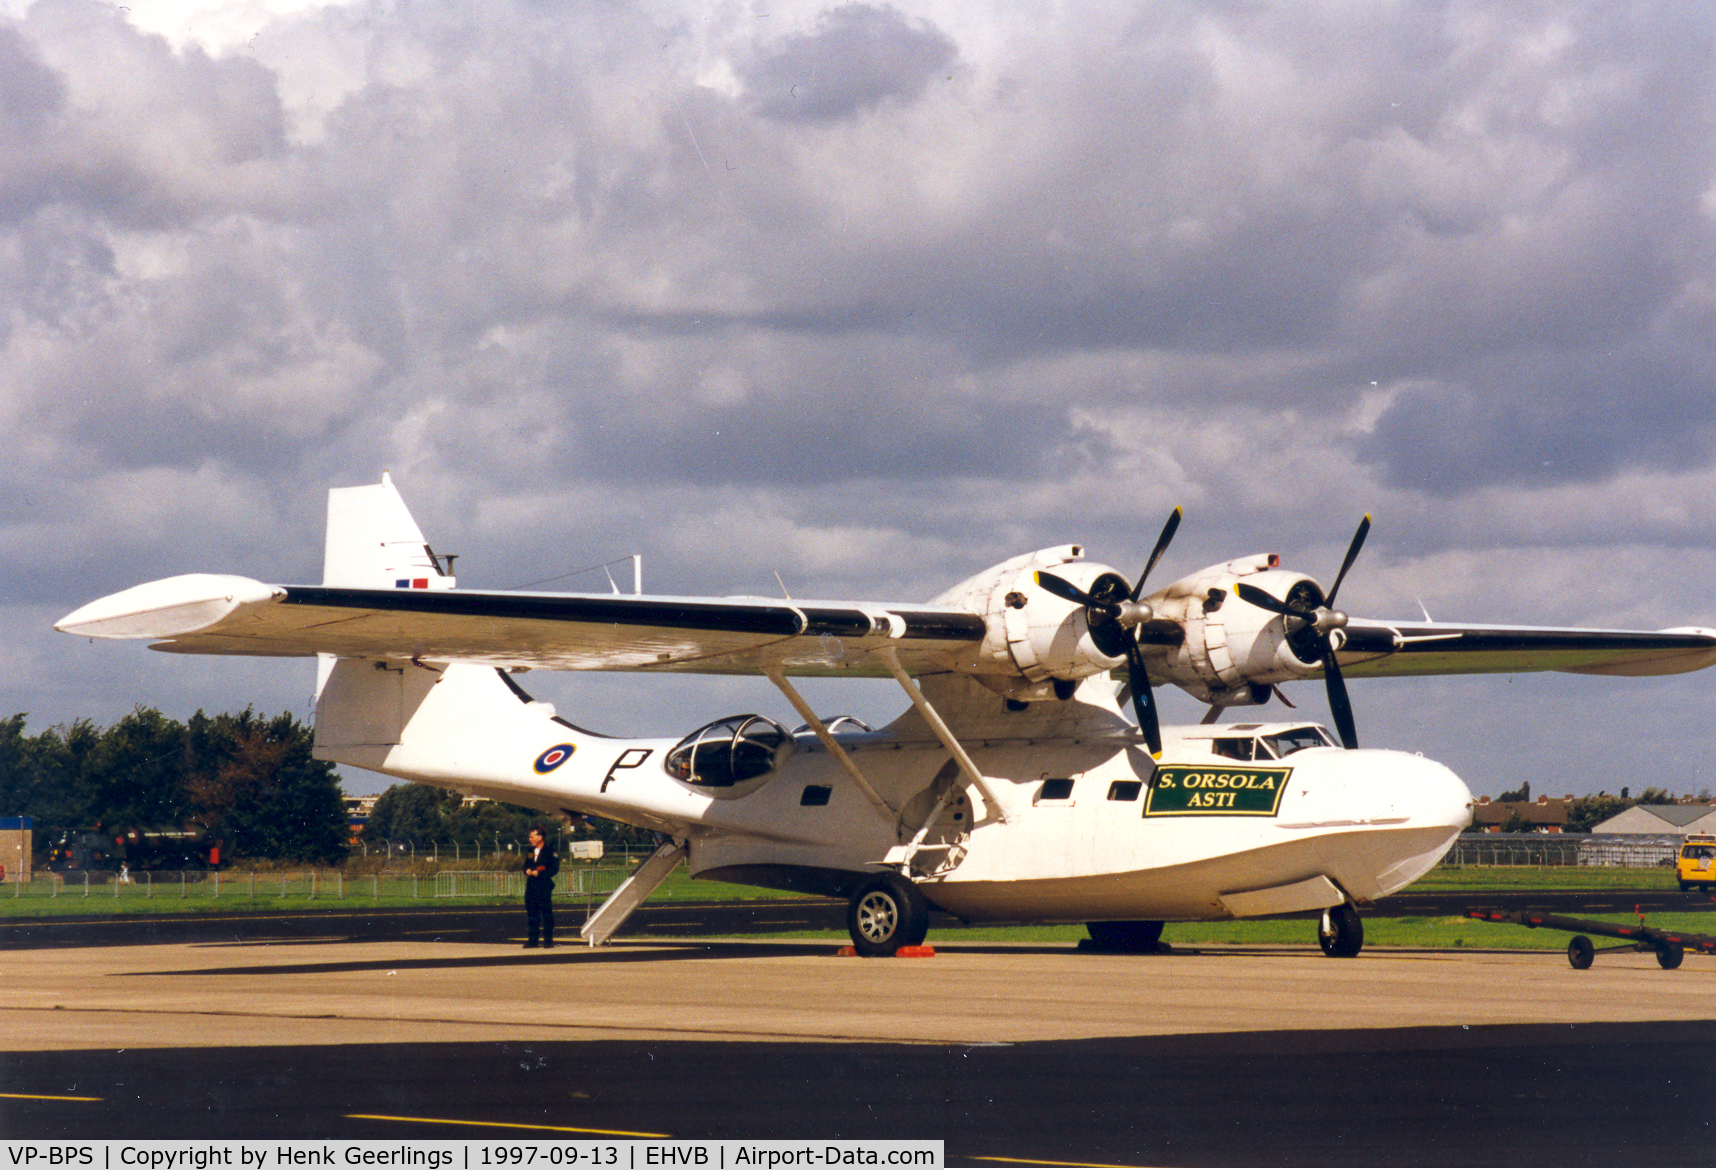 VP-BPS, 1944 Consolidated PBY-5A Catalina C/N 1997, 80 years MLD - Dutch Navy AF. Owner: Plane Sailing Air Displays - UK